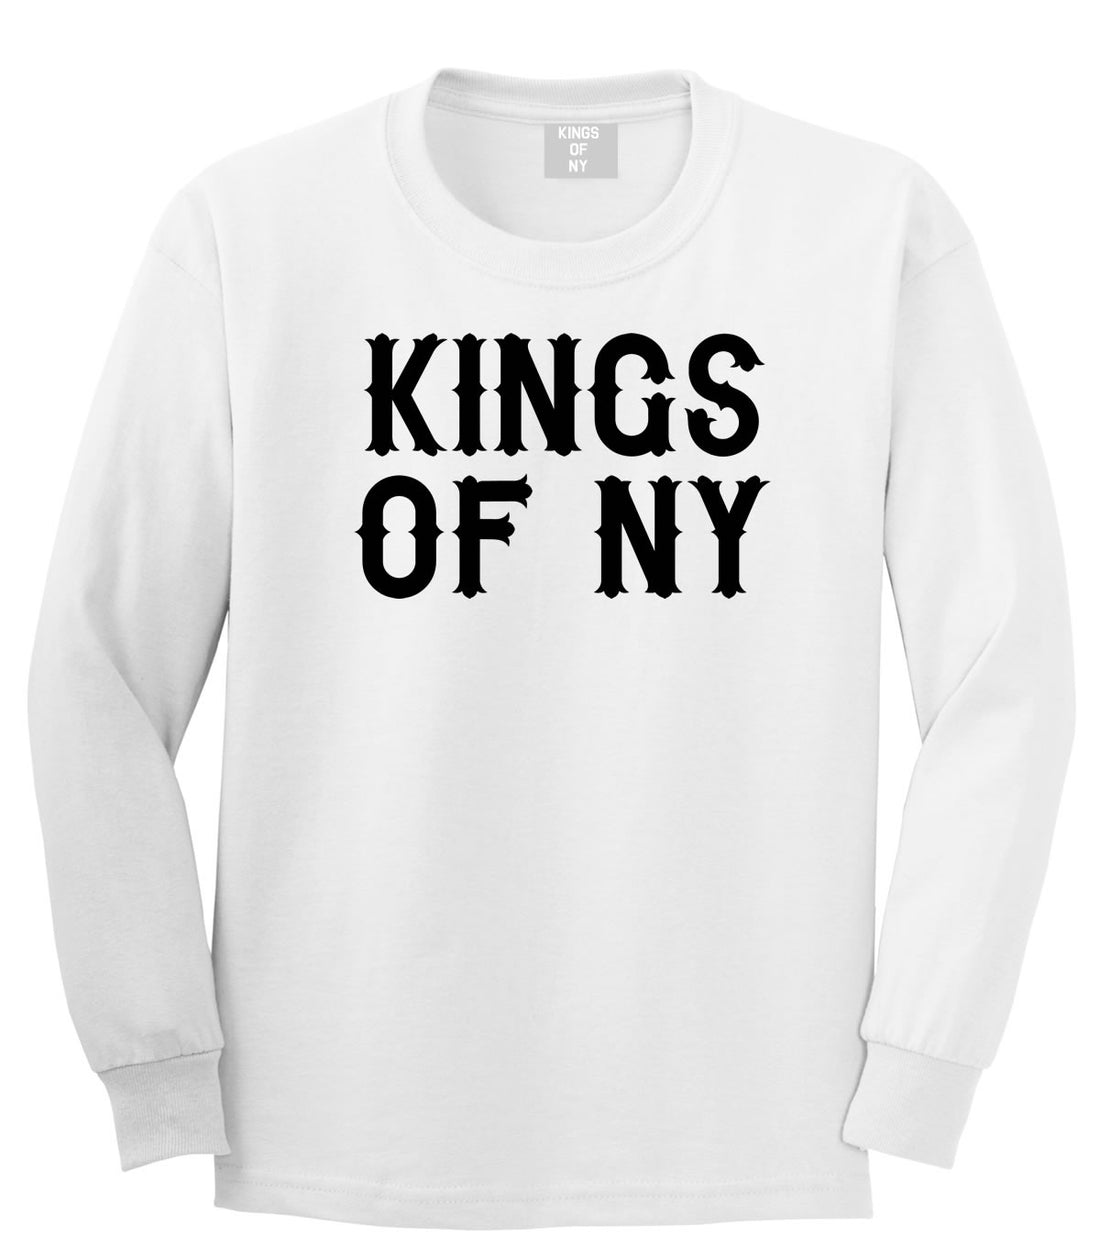 FALL15 Font Logo Print Boys Kids Long Sleeve T-Shirt in White by Kings Of NY